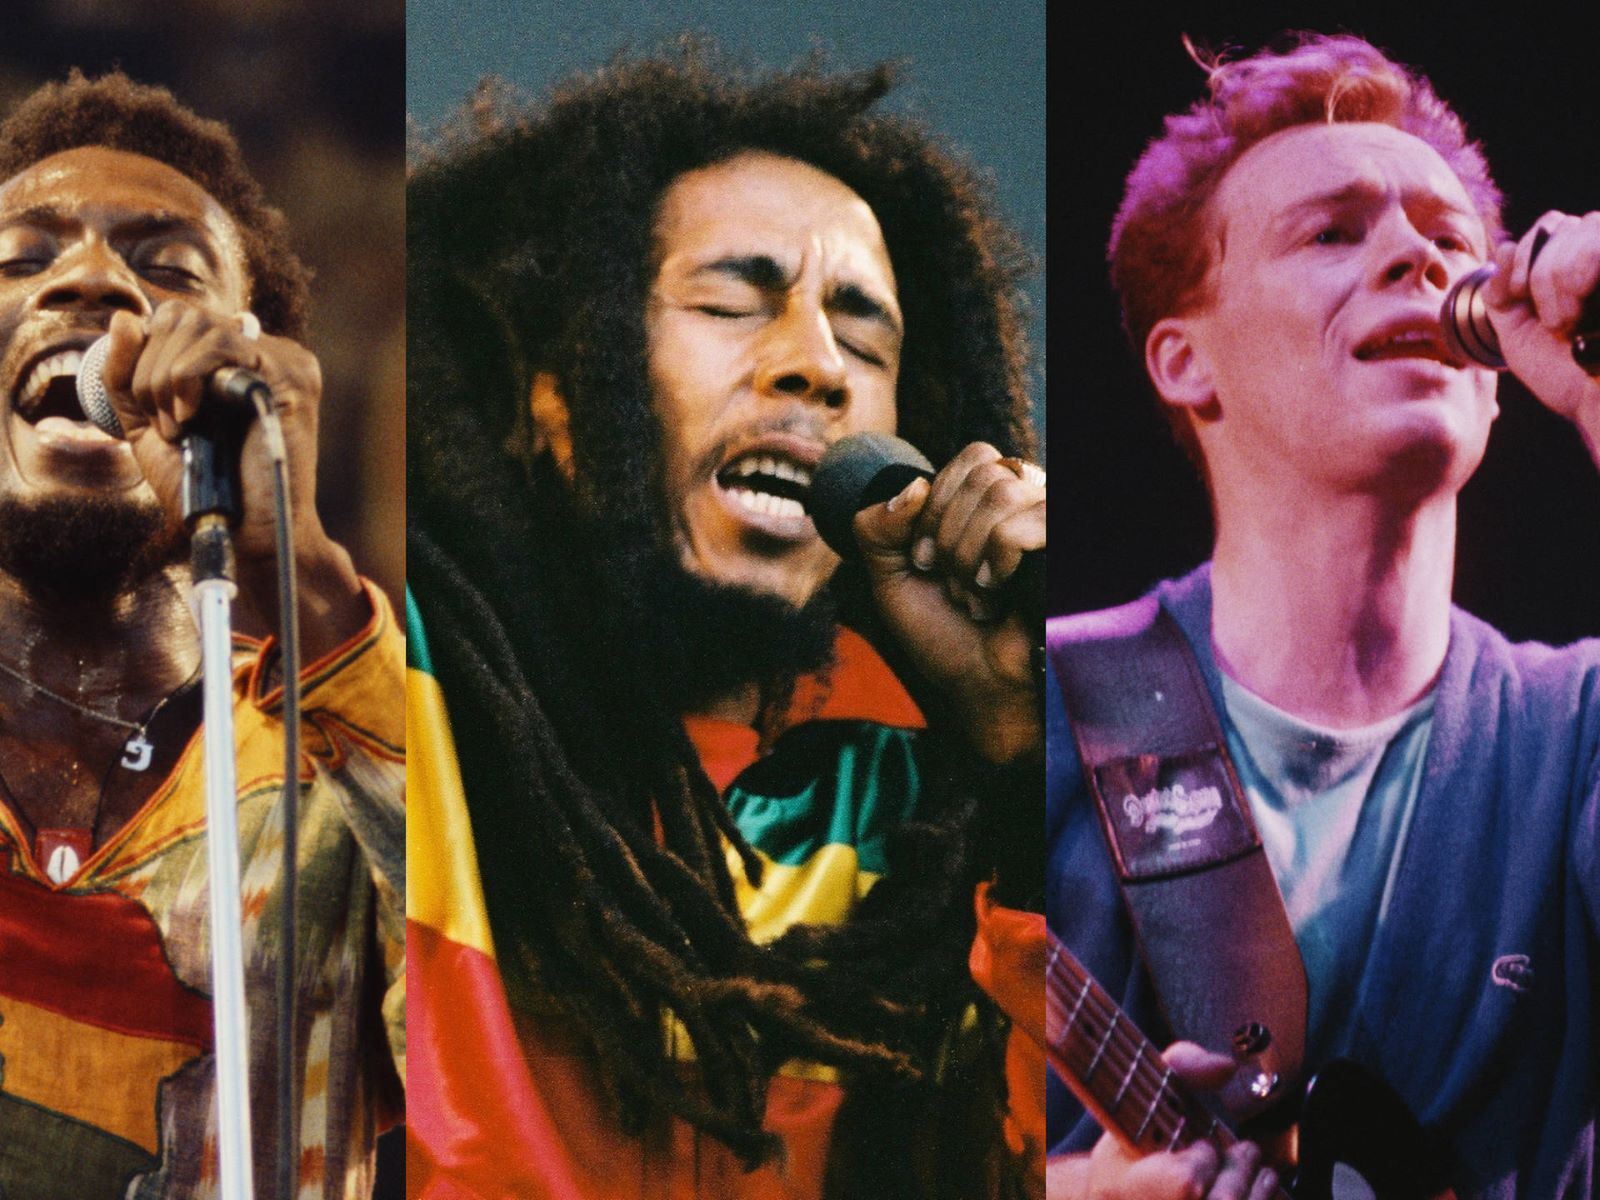 Who Is Considered The First Reggae Superstar